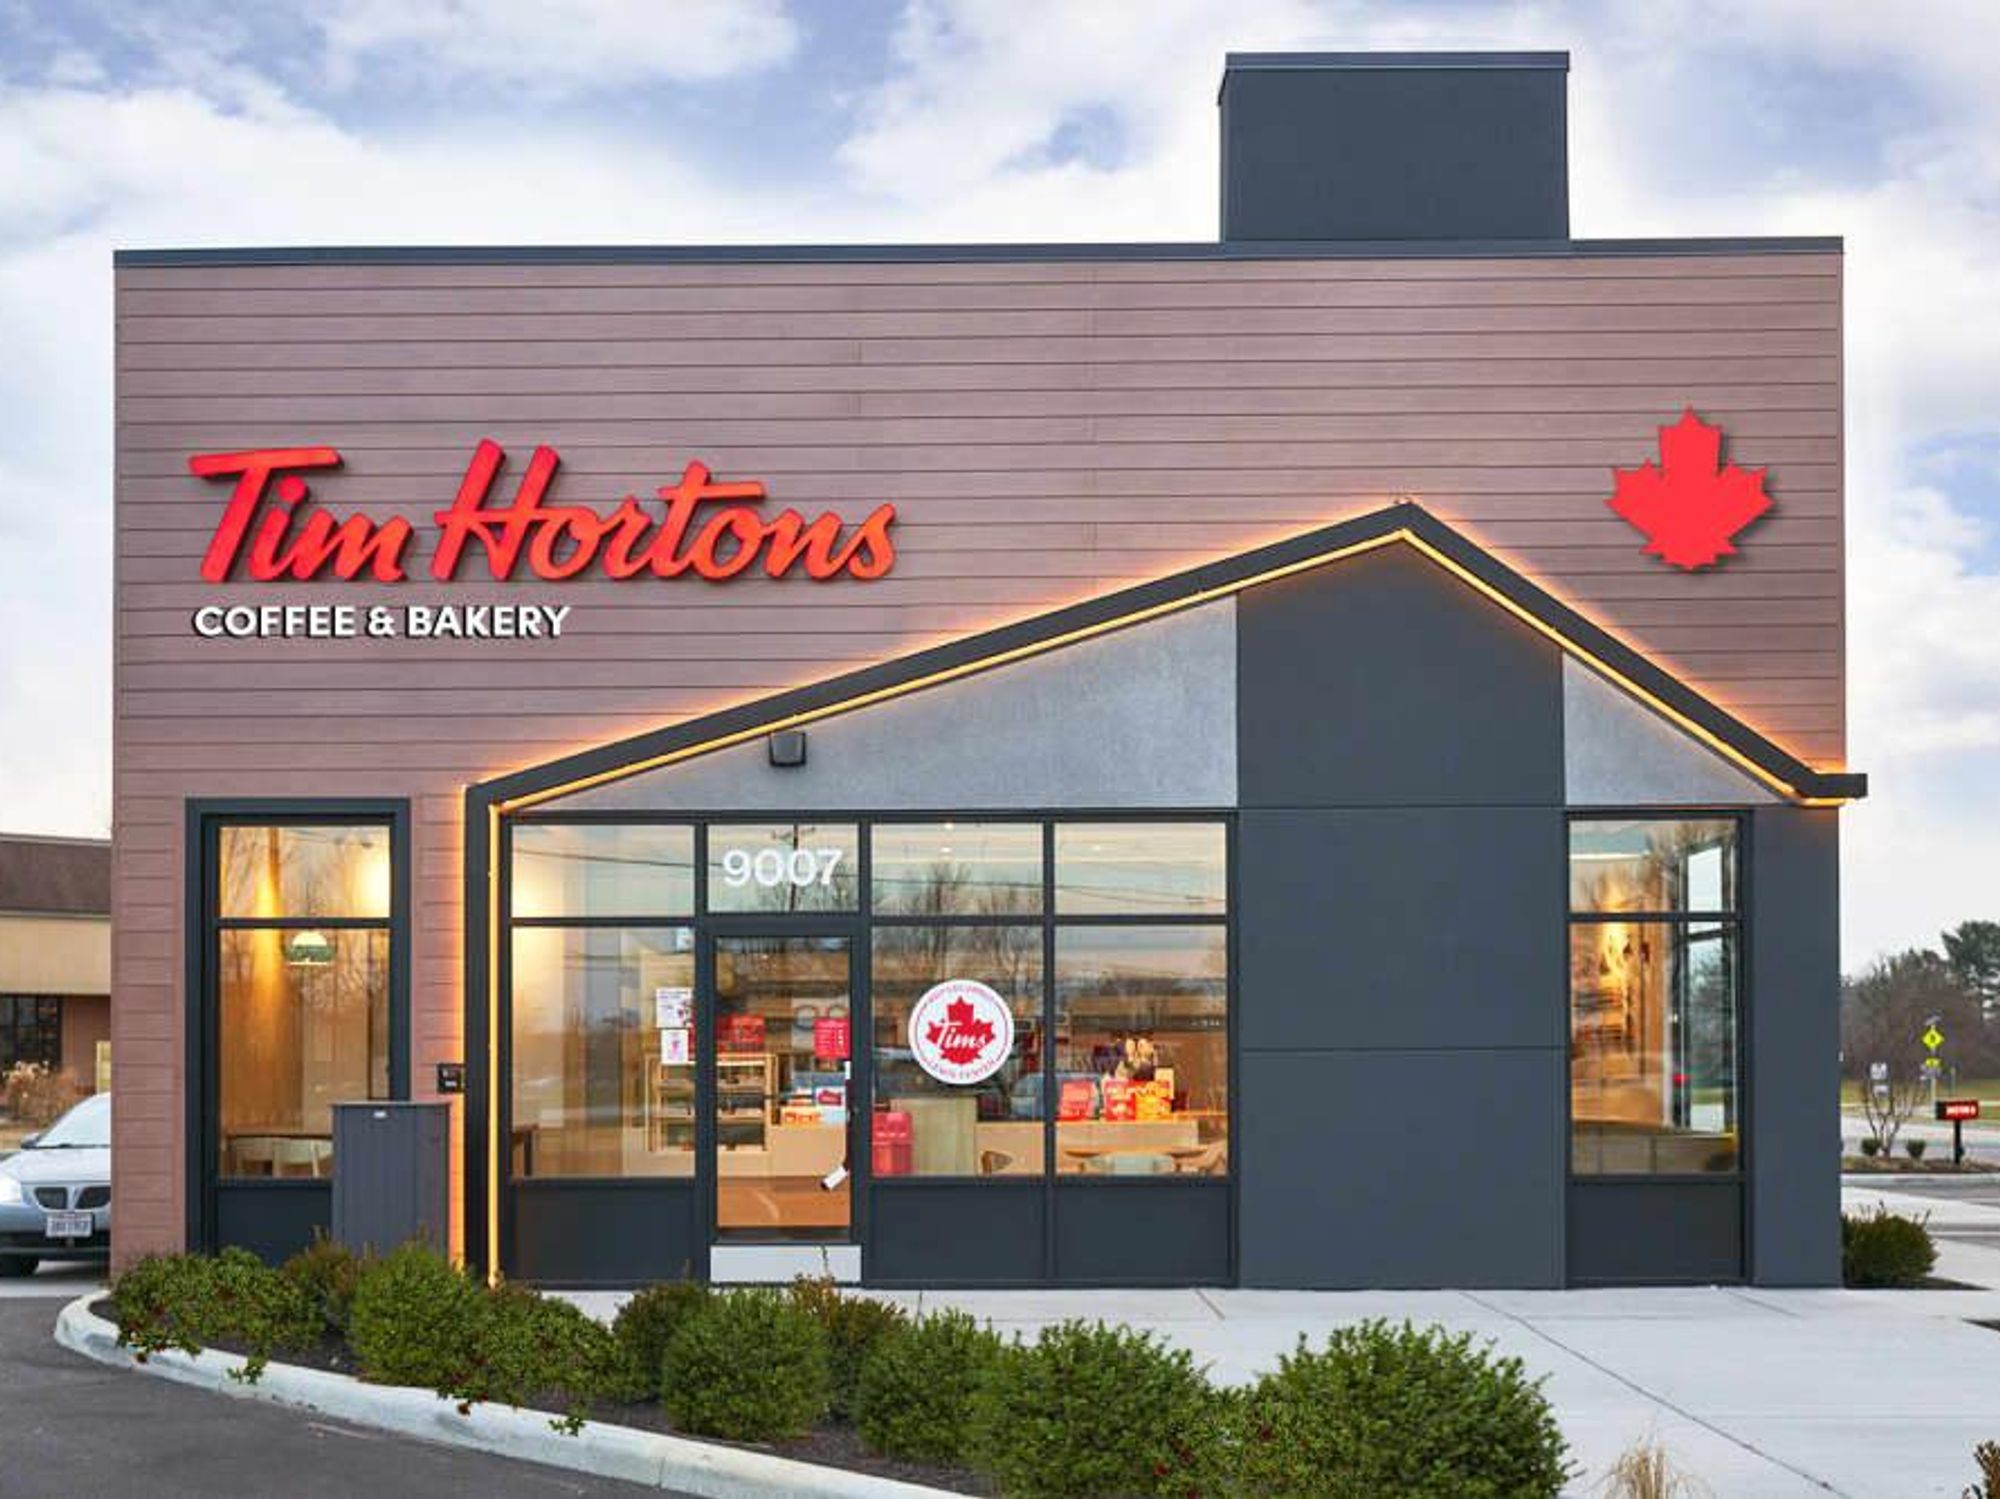 London Got Its First Tim Hortons & The Menu Is Totally Different